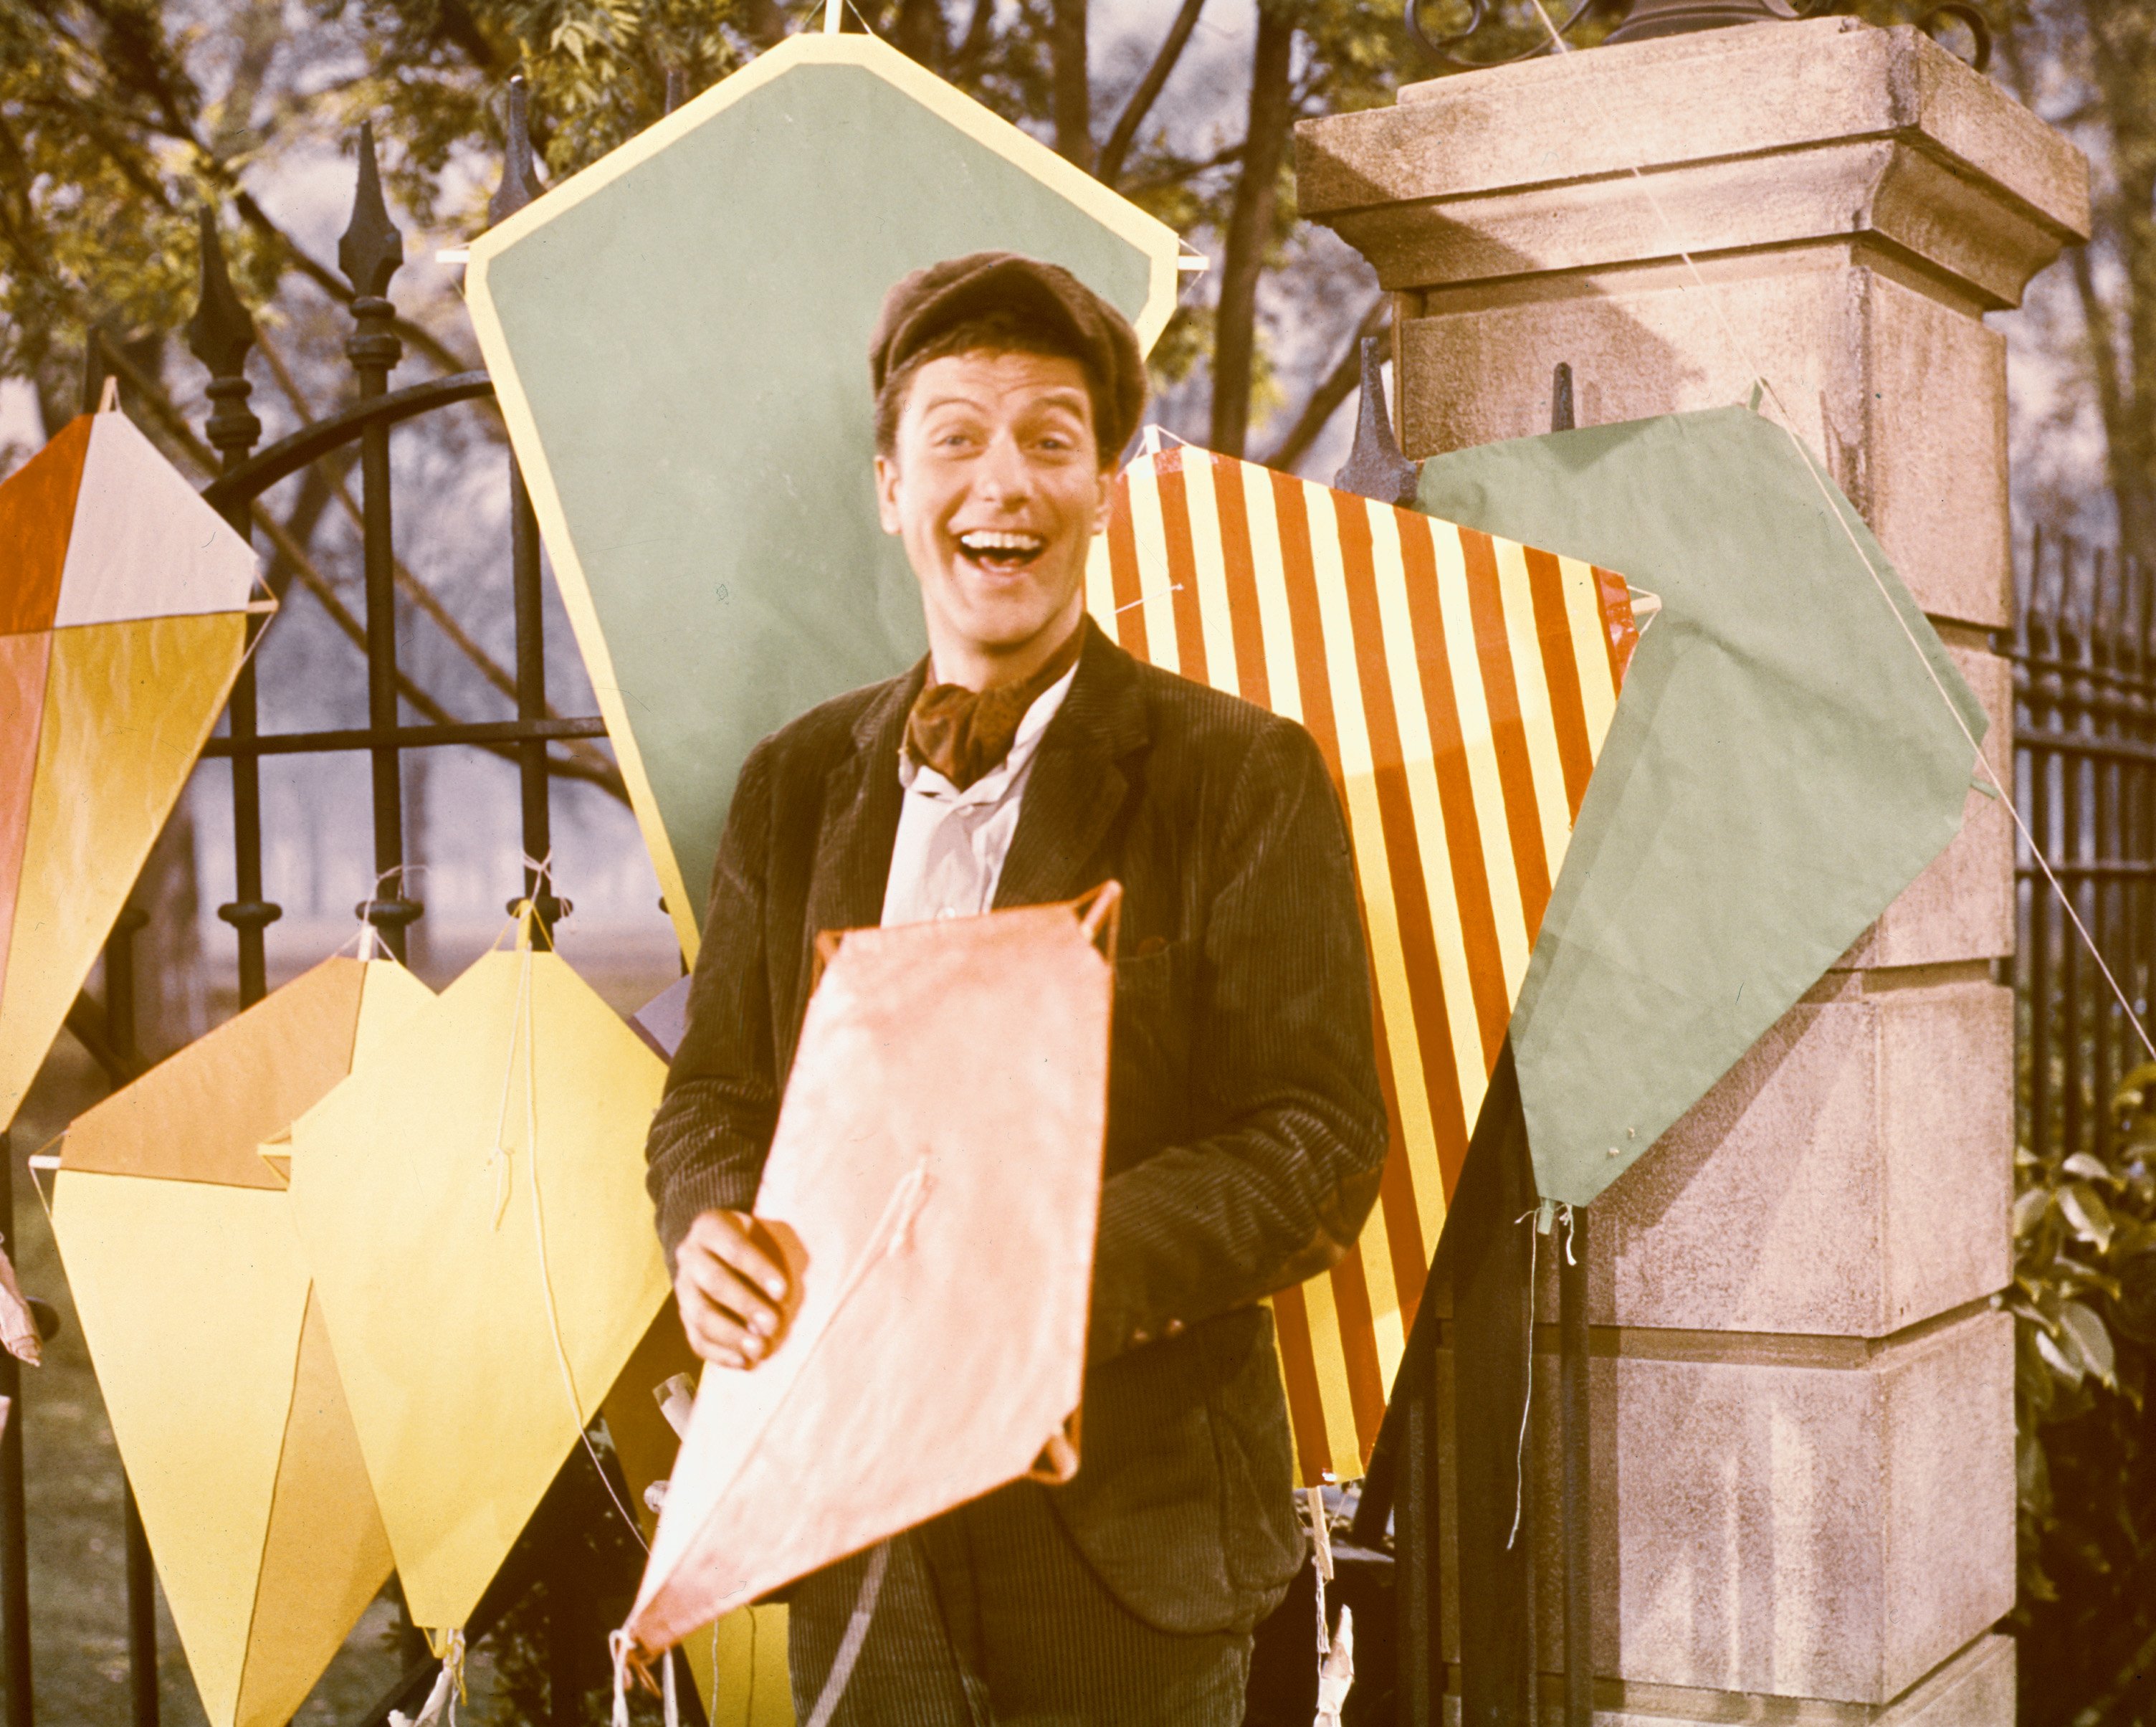 Dick Van Dyke poses with a variety of kites in a publicity still for the film, 'Mary Poppins', USA, 1964 | Source: Getty Images 